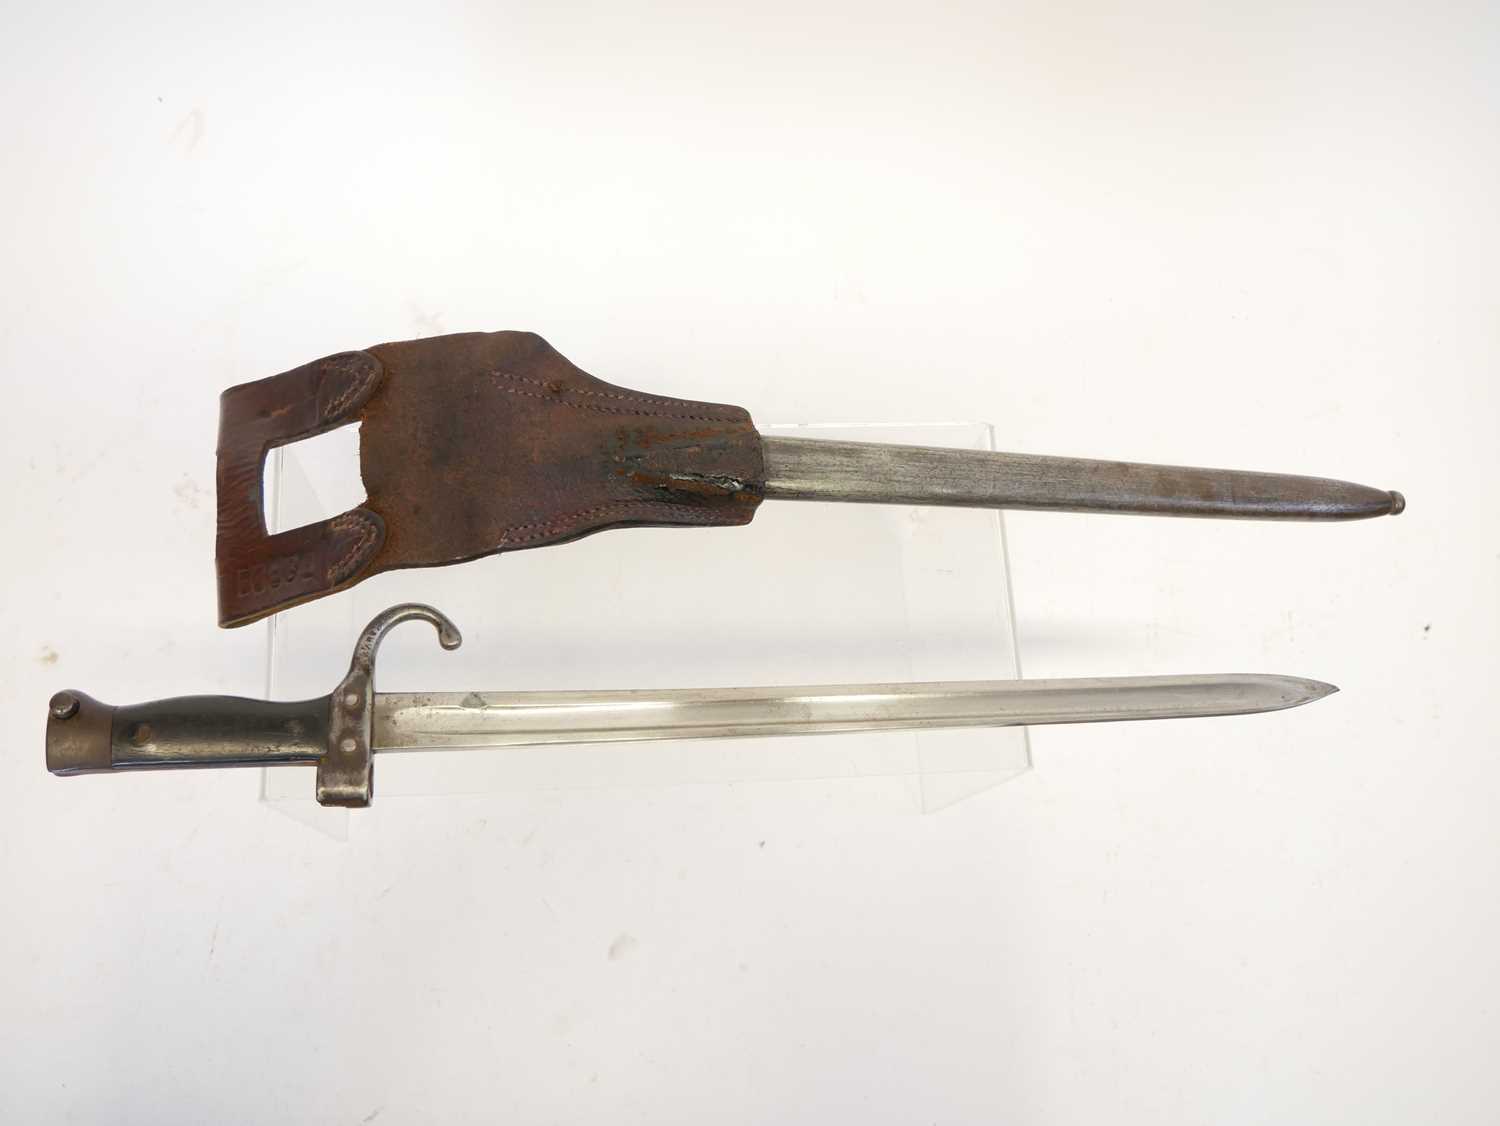 French 1892 Berthier 1st pattern bayonet and scabbard, with leather frog stamped E203. Buyer must be - Image 5 of 9